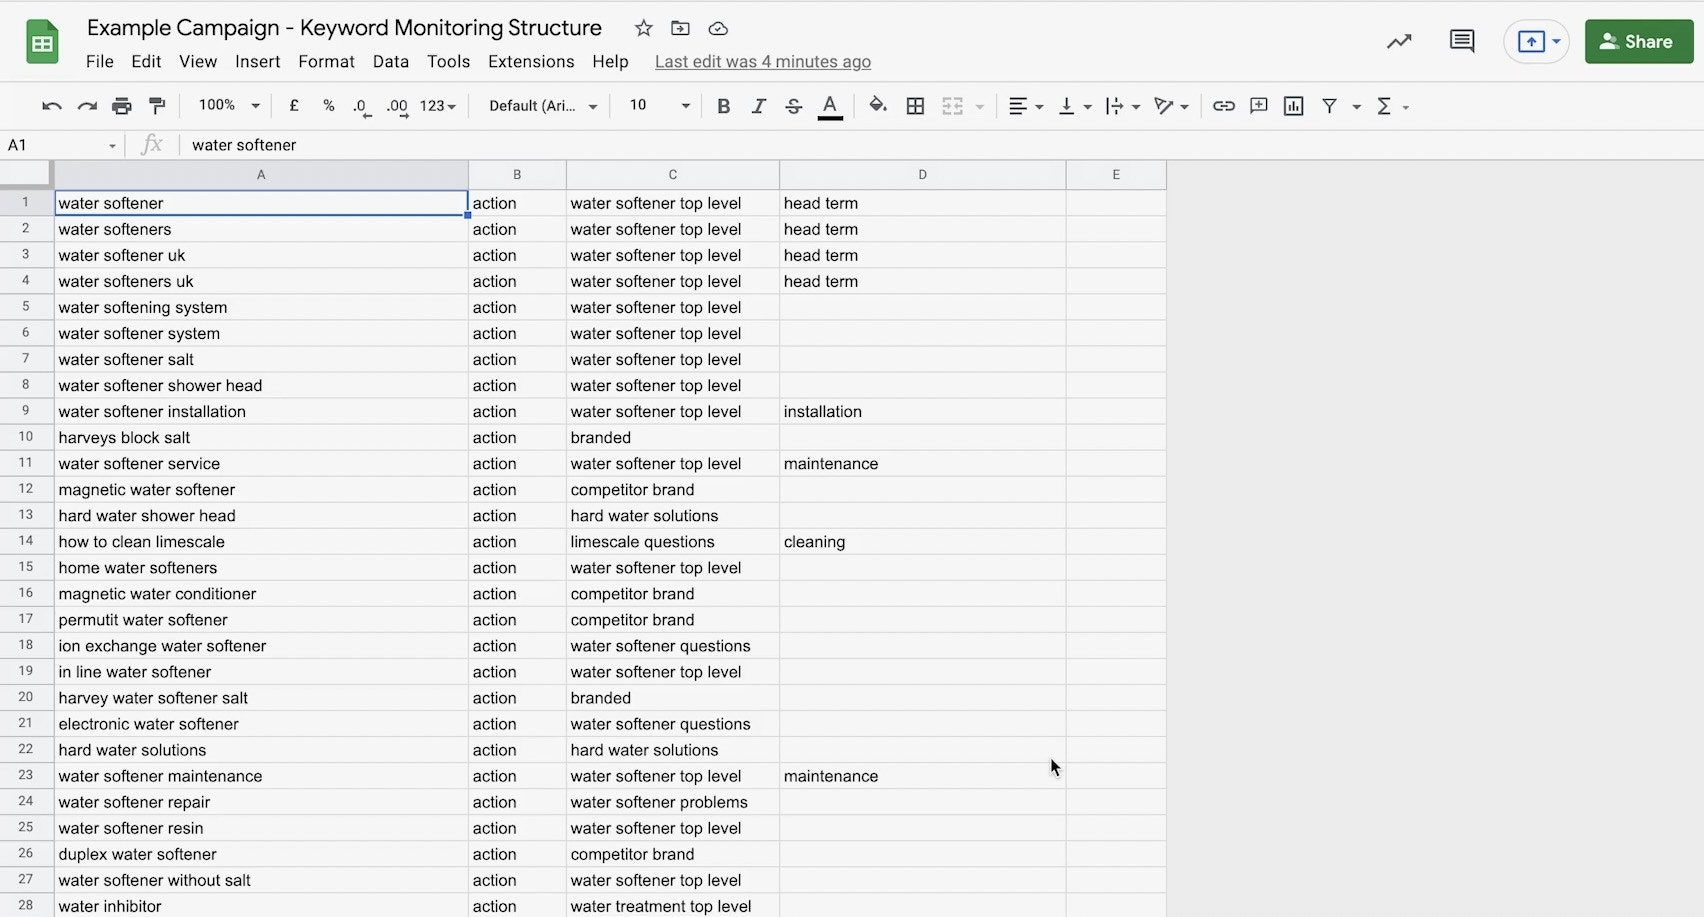 Example campaign set up in Google Sheet for keyword monitoring structure in SEOmonitor.